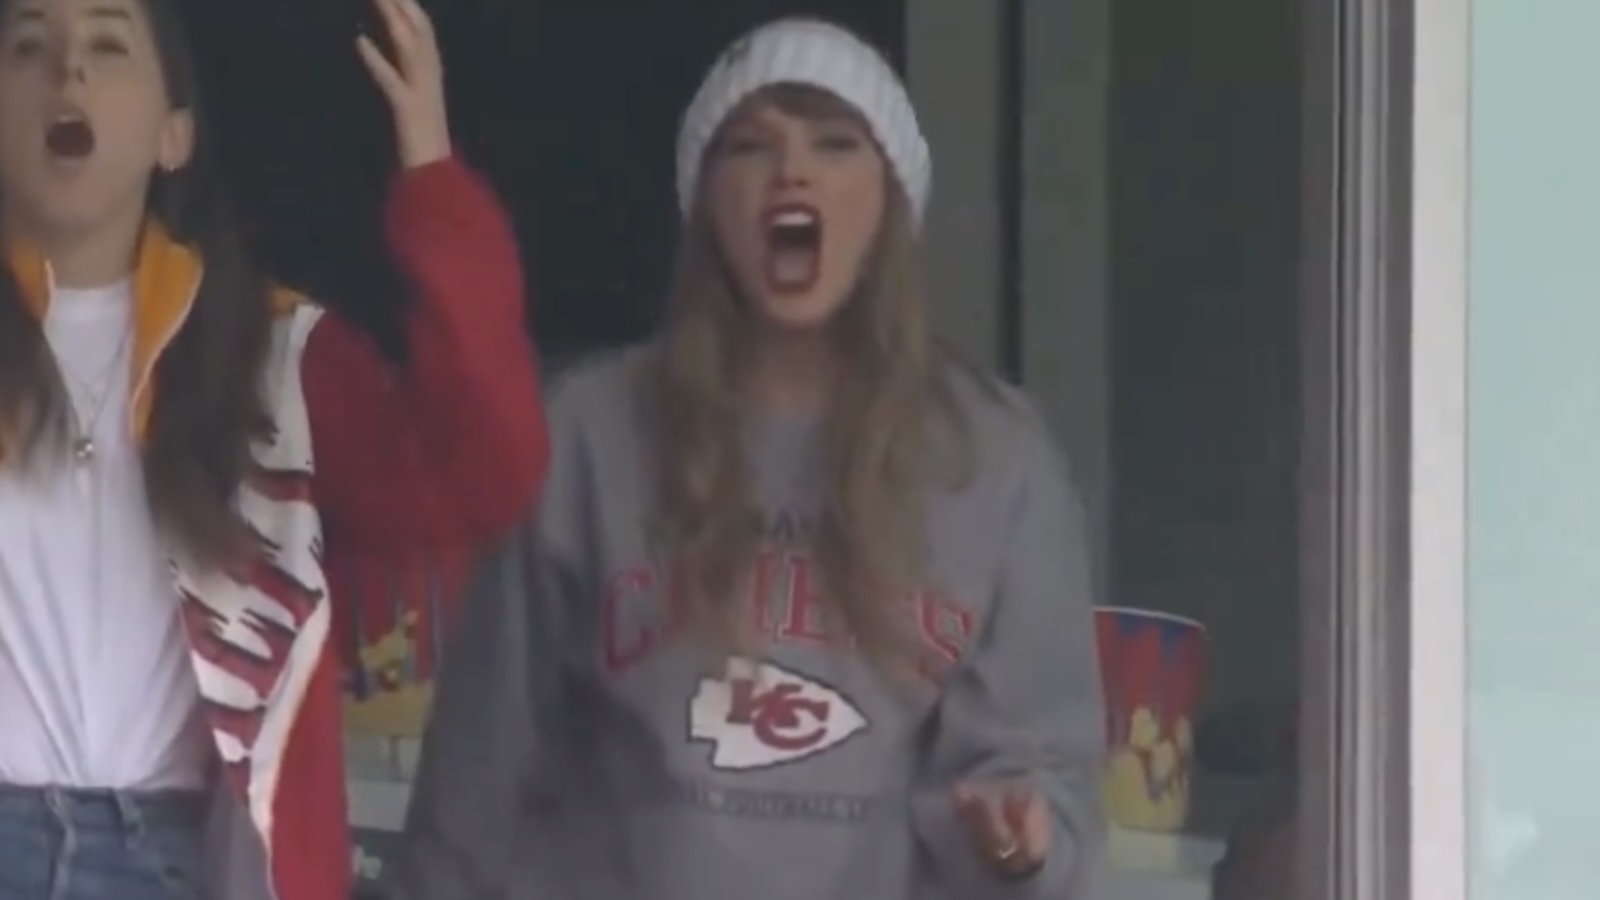 Taylor Swift screams at refs over Travis Kelce play in viral video